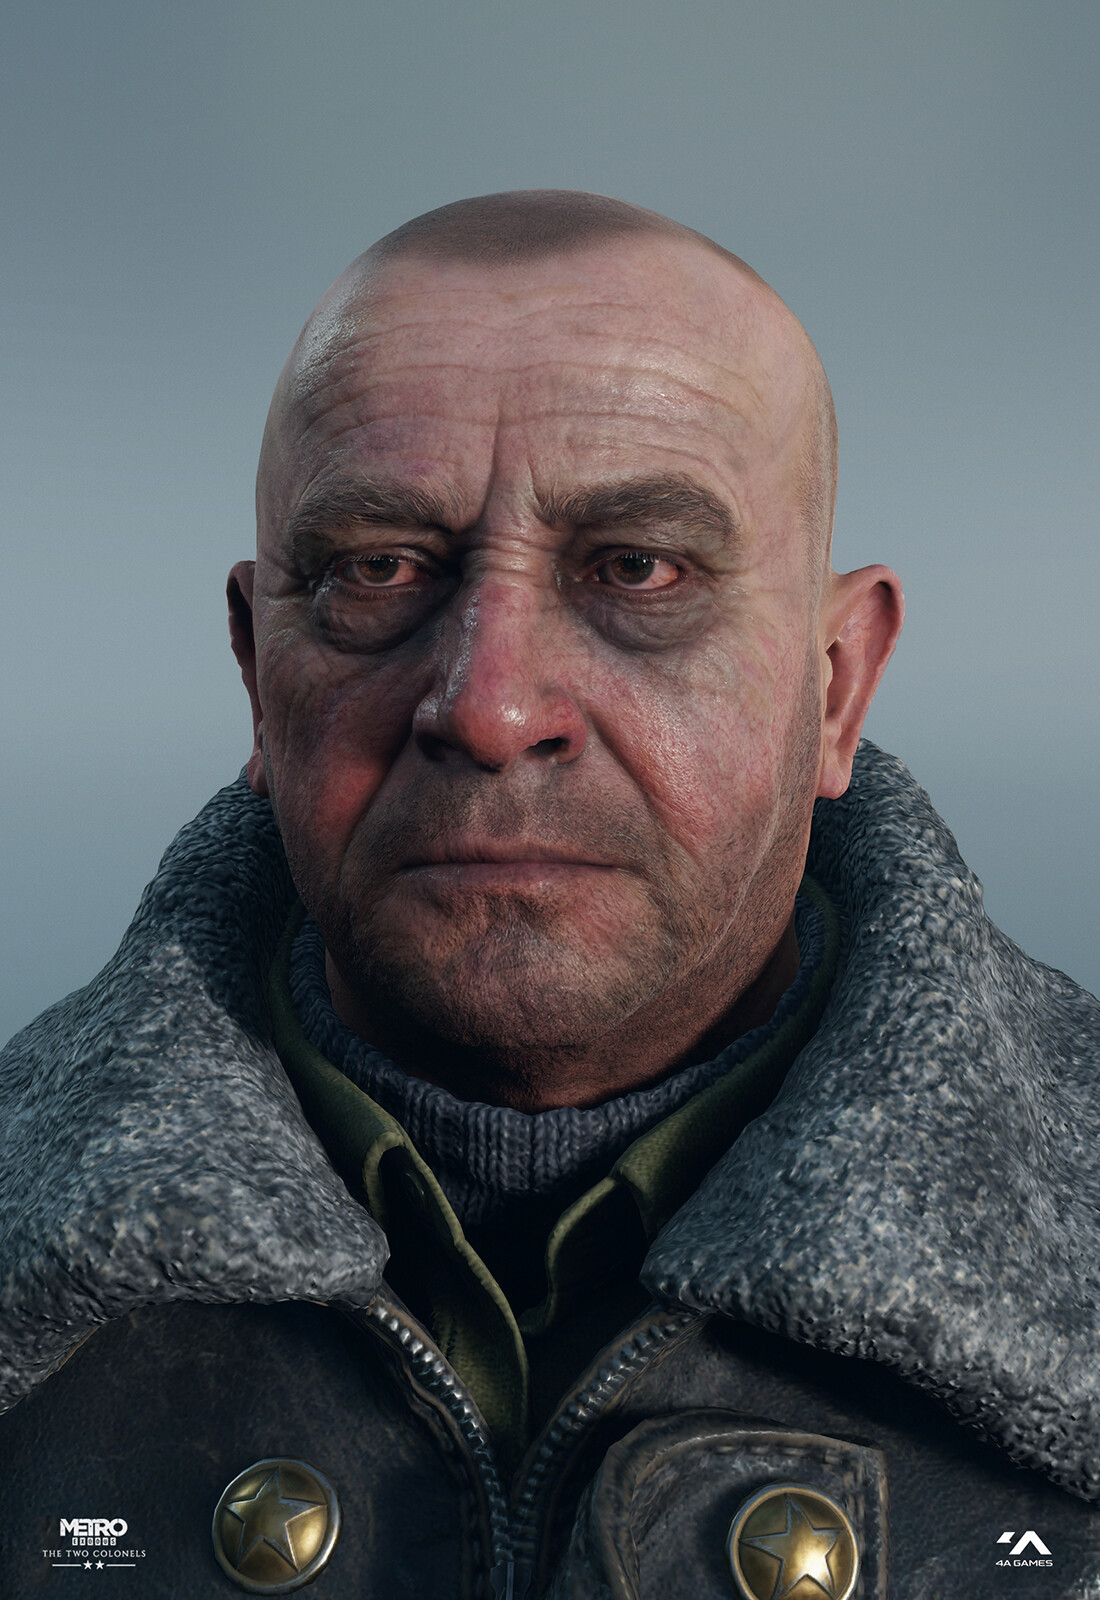 tired face - texture set (skin shader is off)